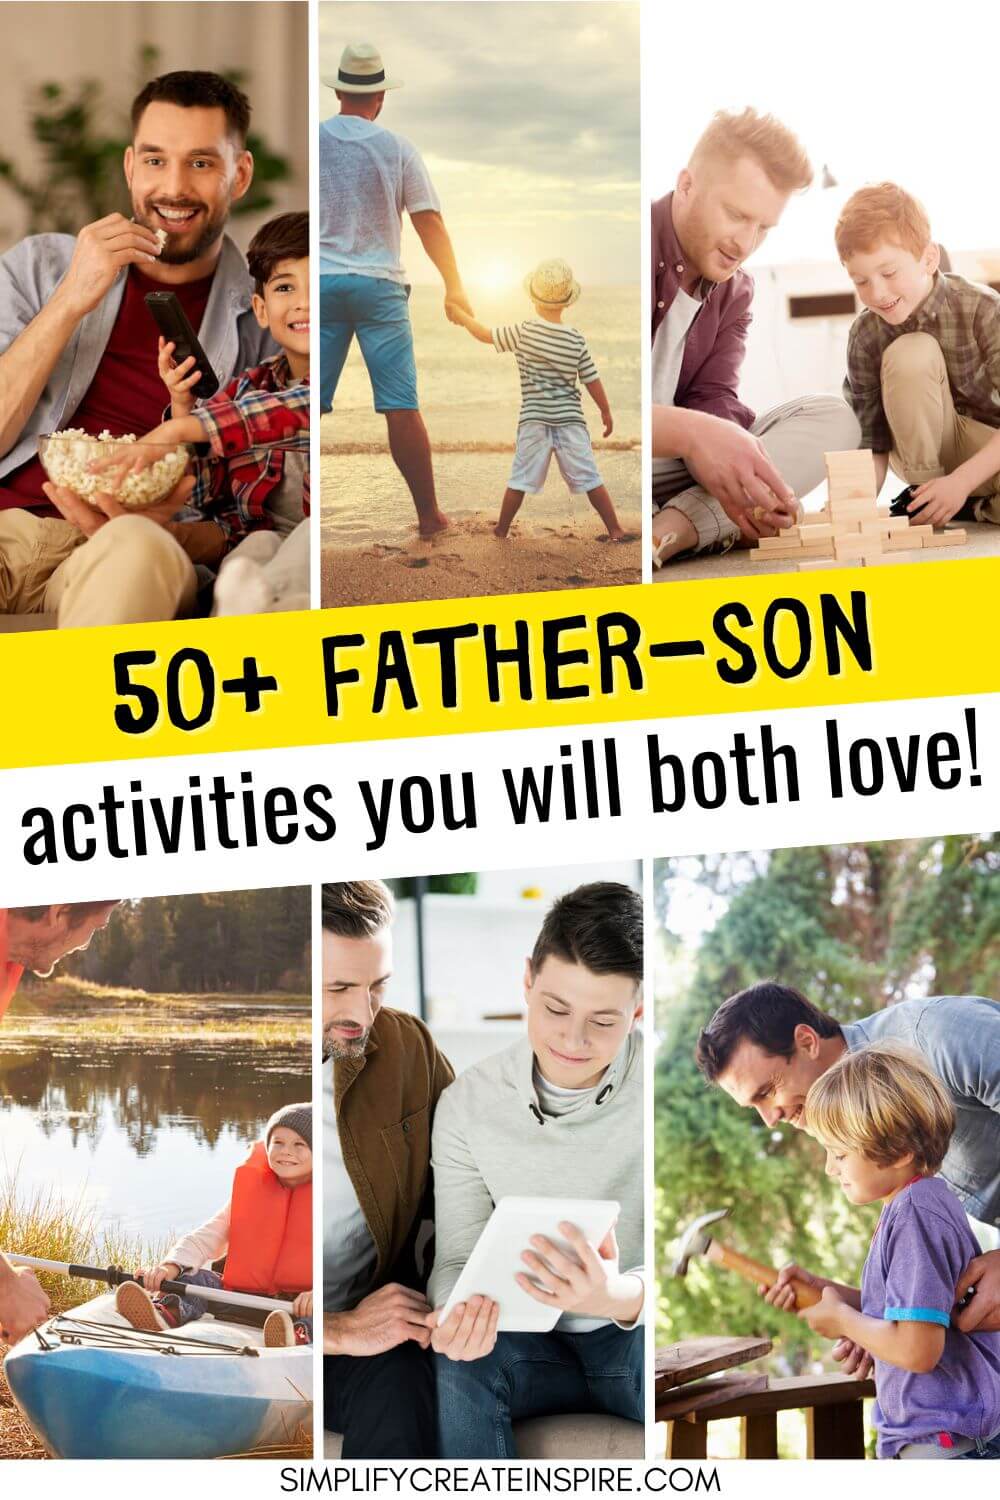 pinterest image - father son activities for father-son day ideas